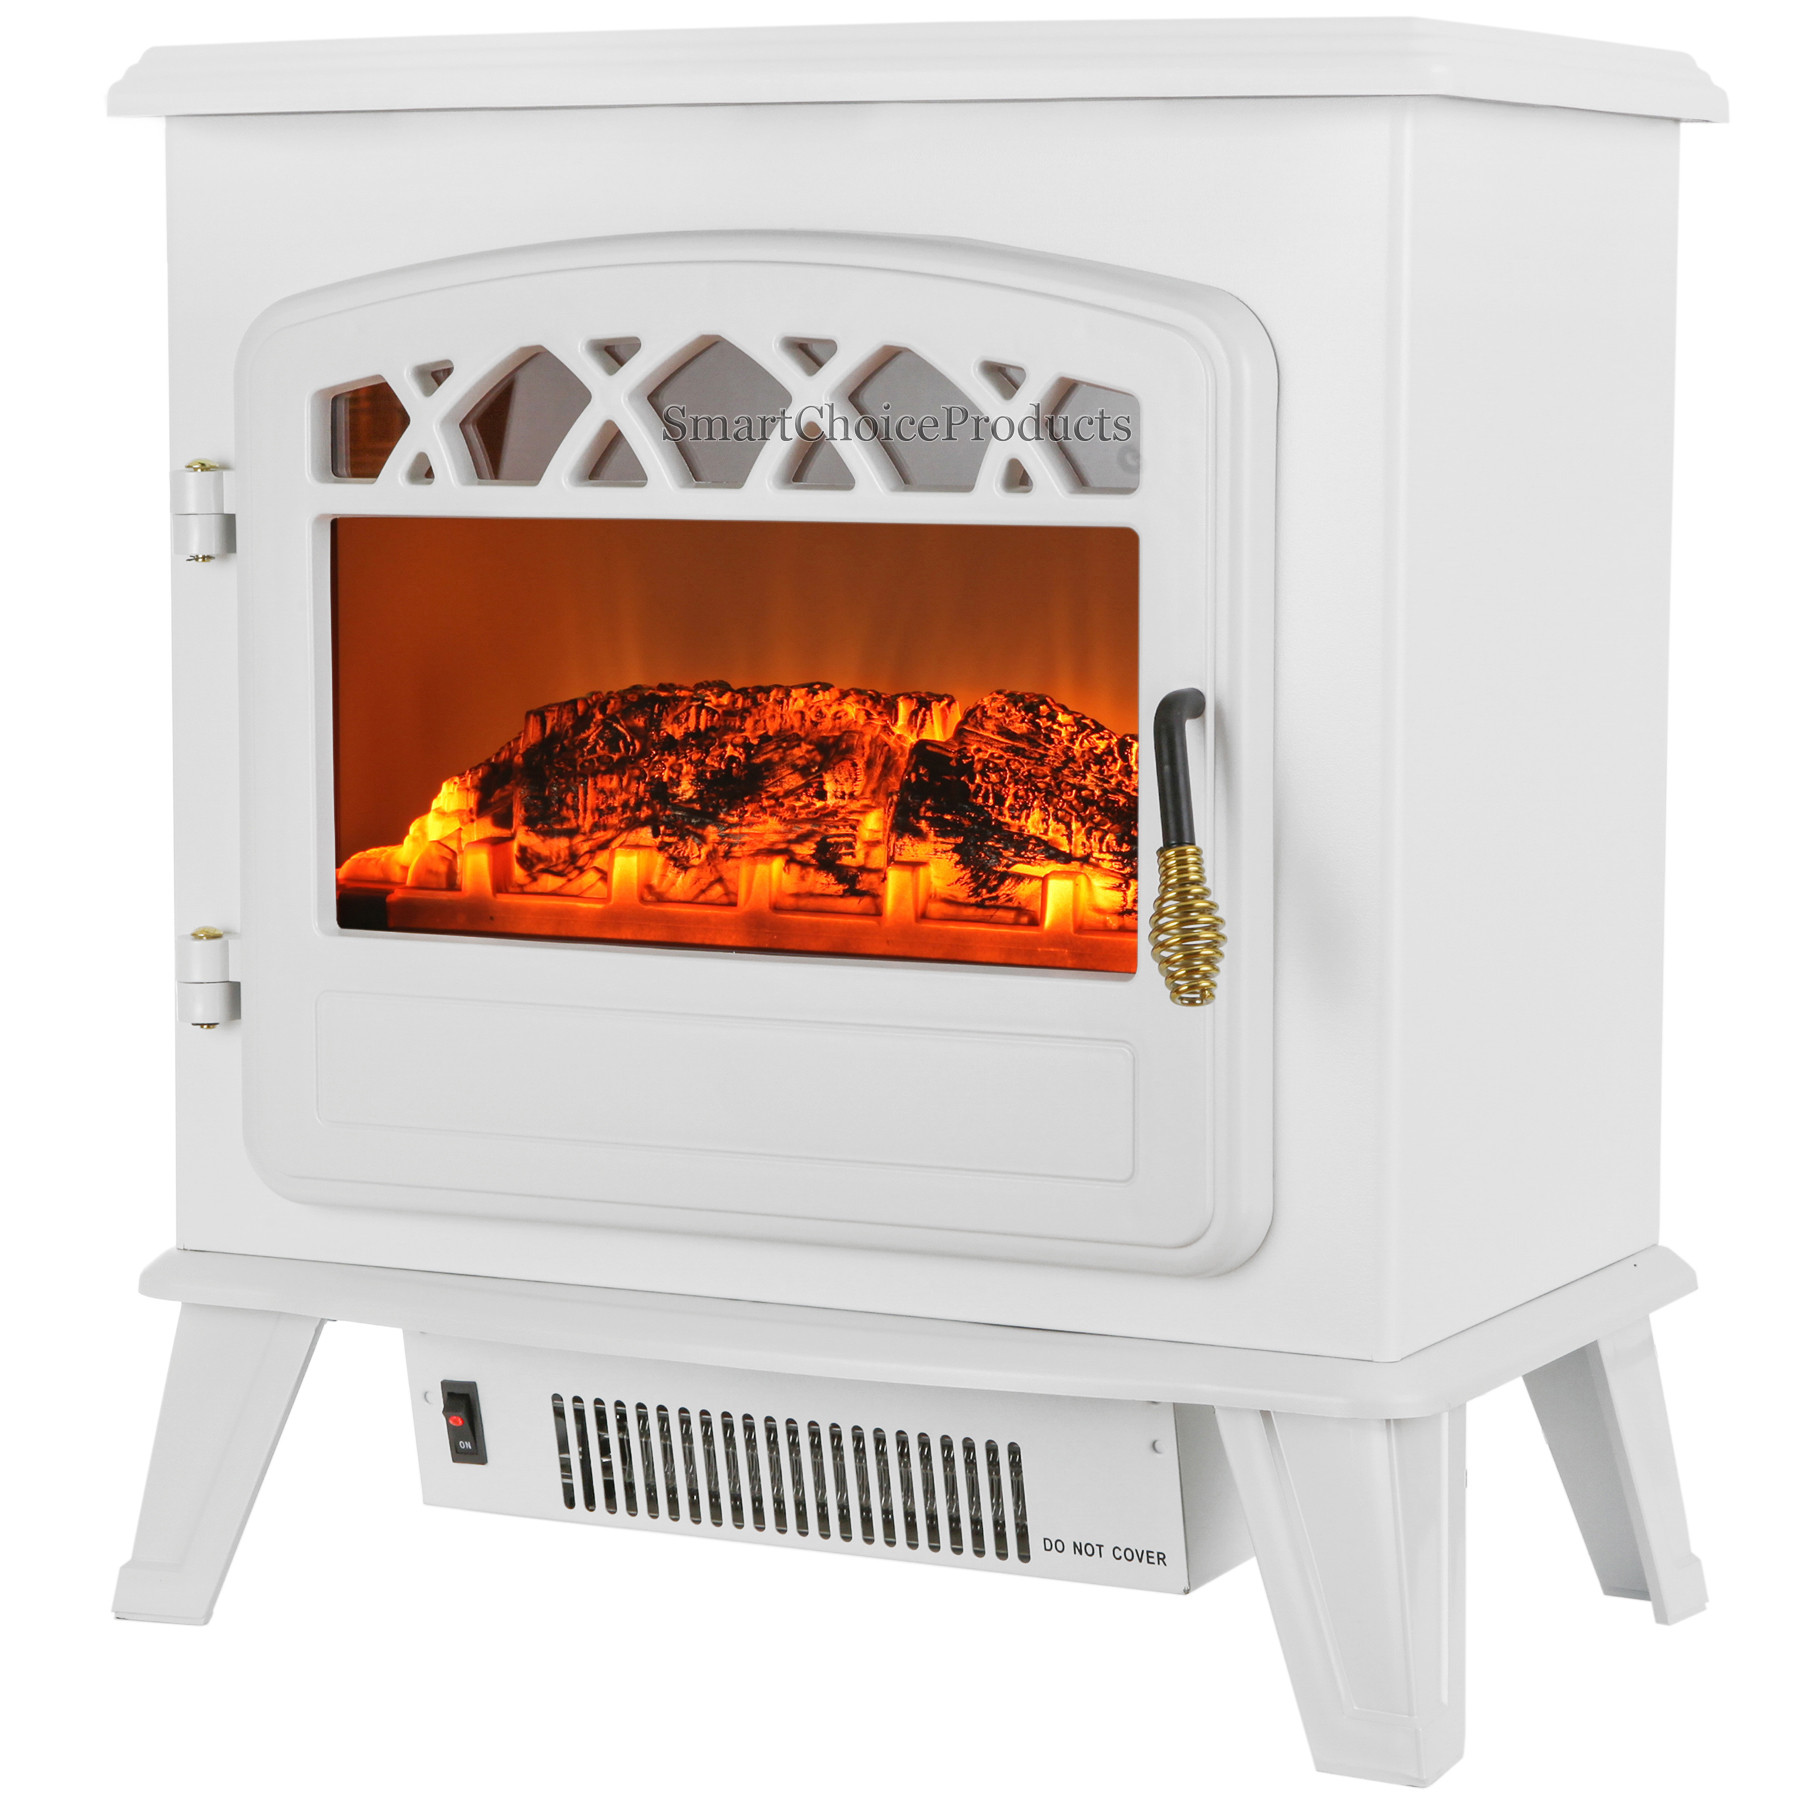 Retro Electric Fireplace
 20" White Vintage Electric Fireplace Freestanding Tempered